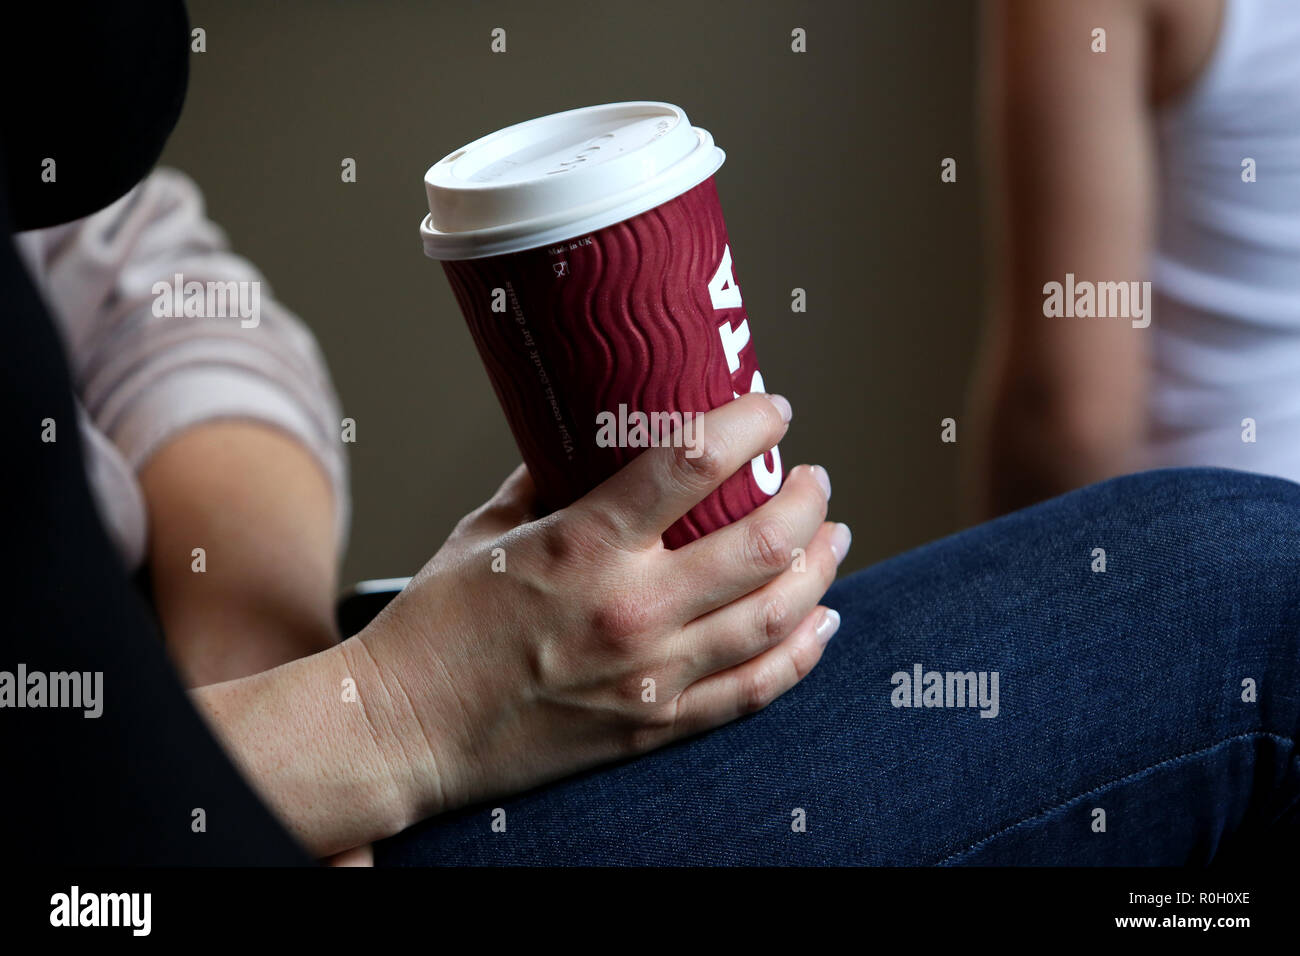 A lady holding a Costa Coffee take-away cup on her lap in London, UK. Stock Photo